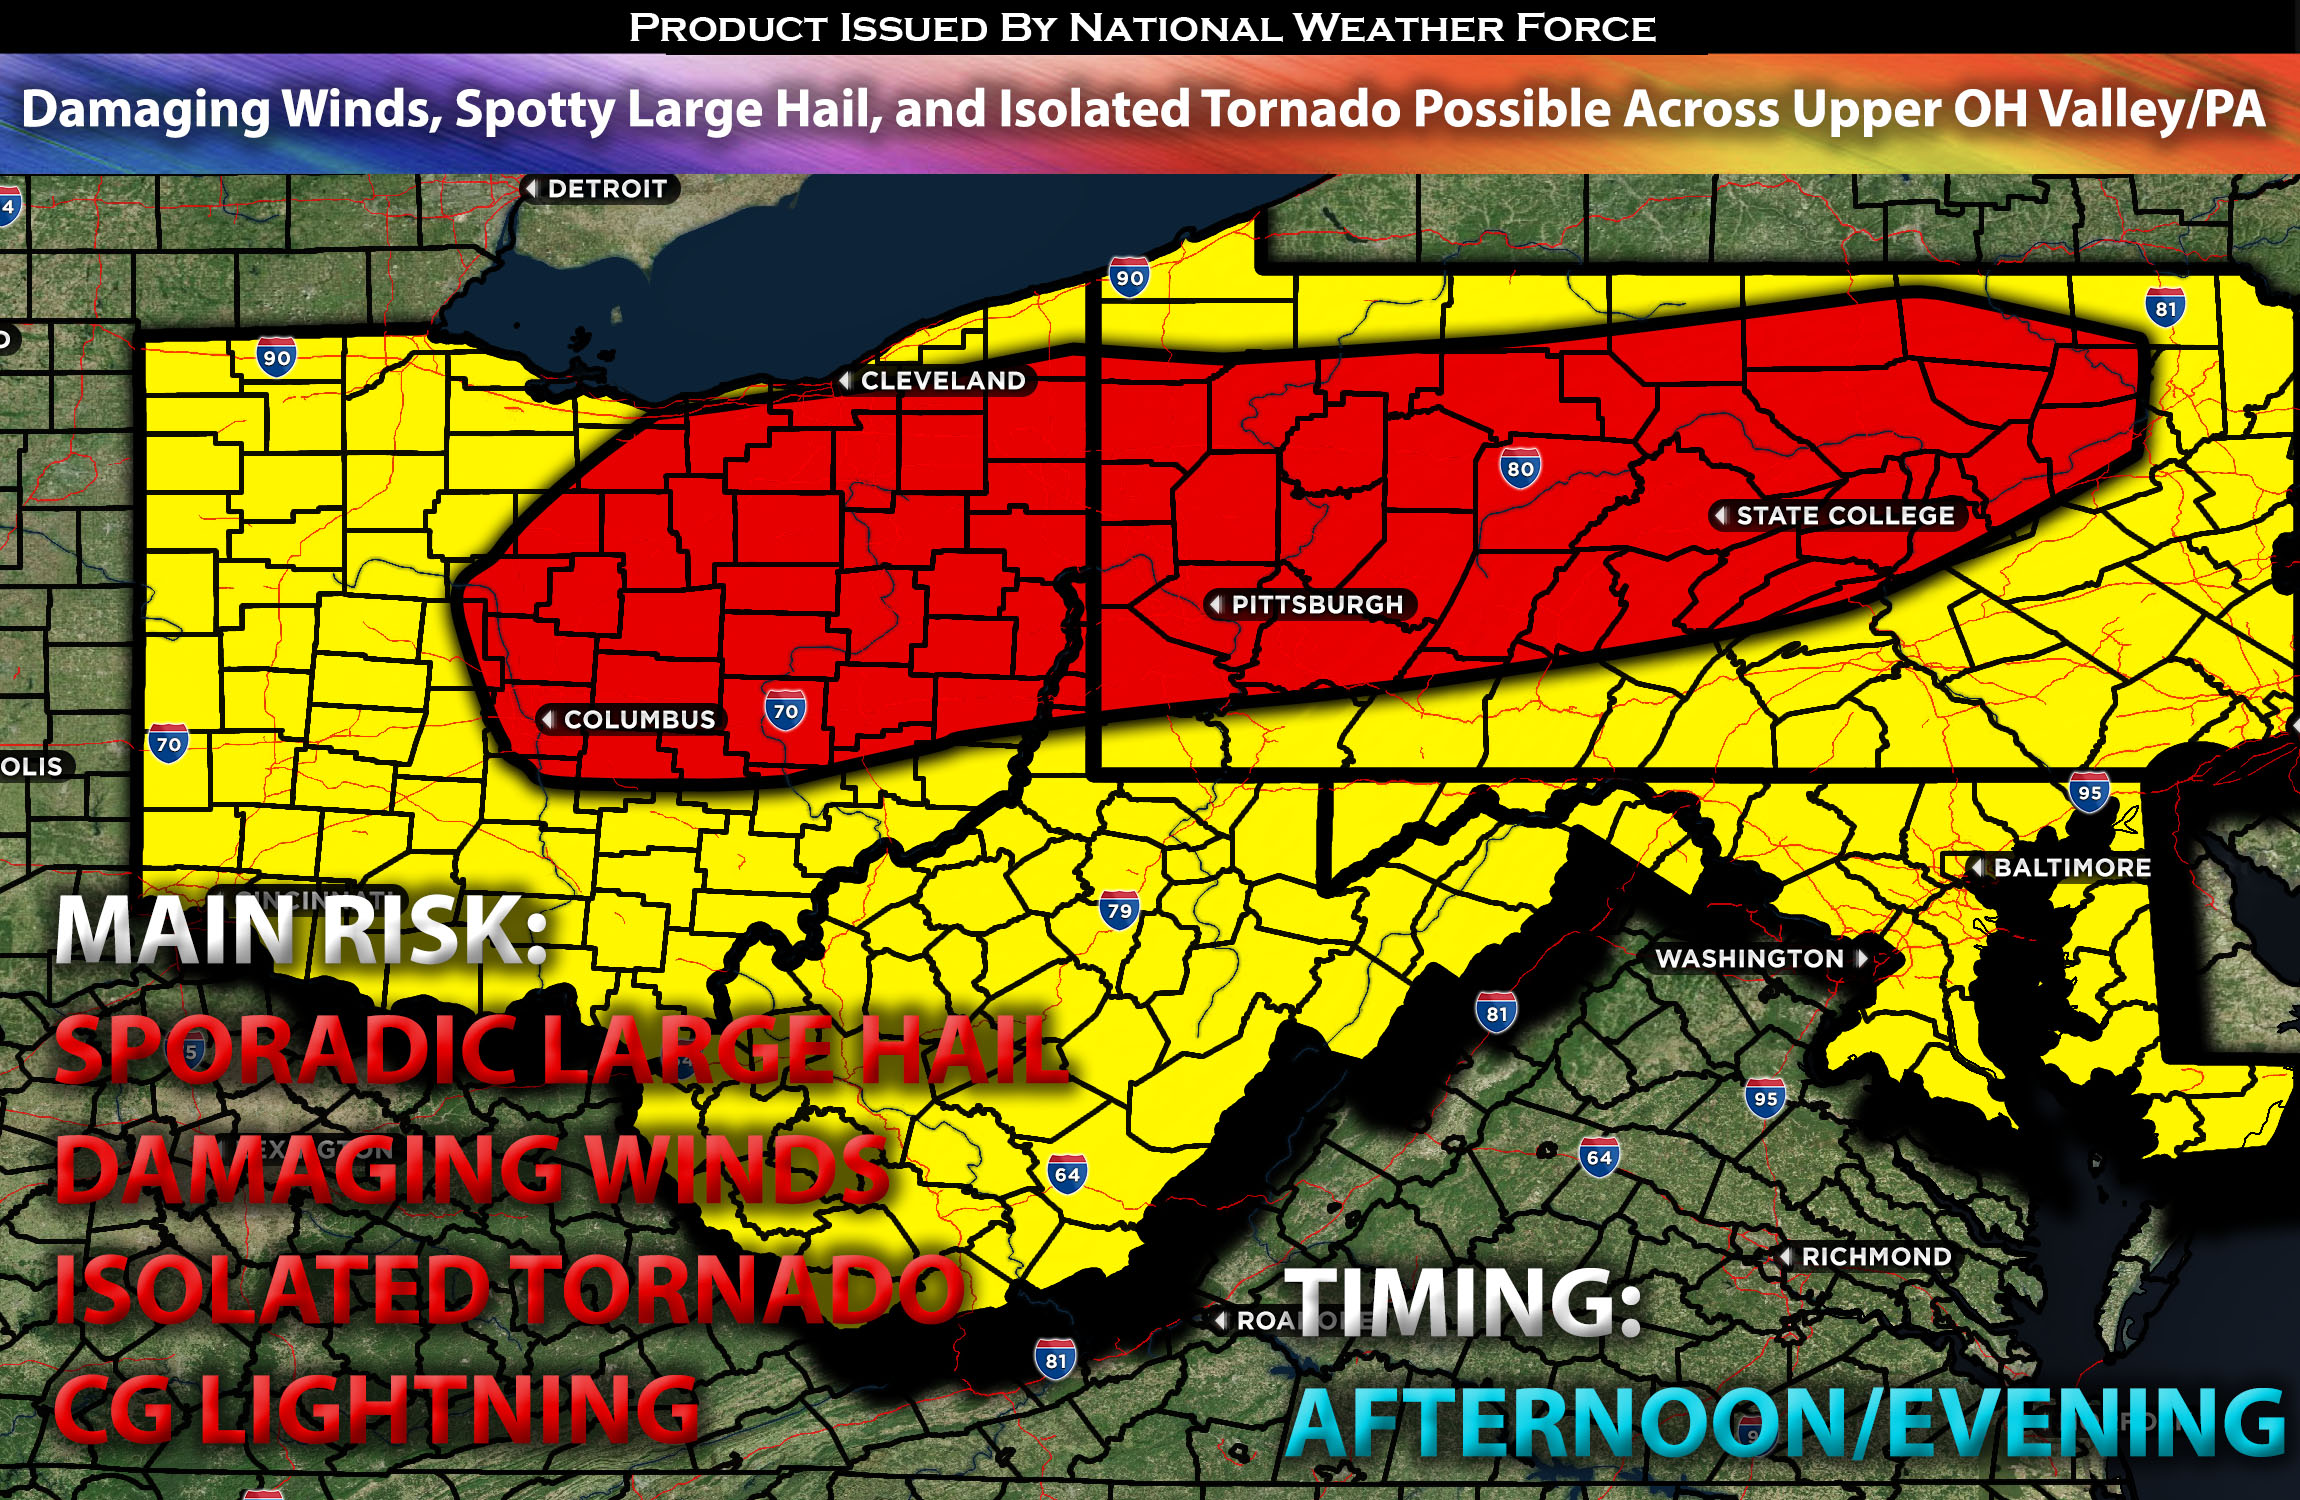 Damaging Winds, Spotty Large Hail, and Isolated Tornado Possible Across Upper OH Valley & PA on April 14th